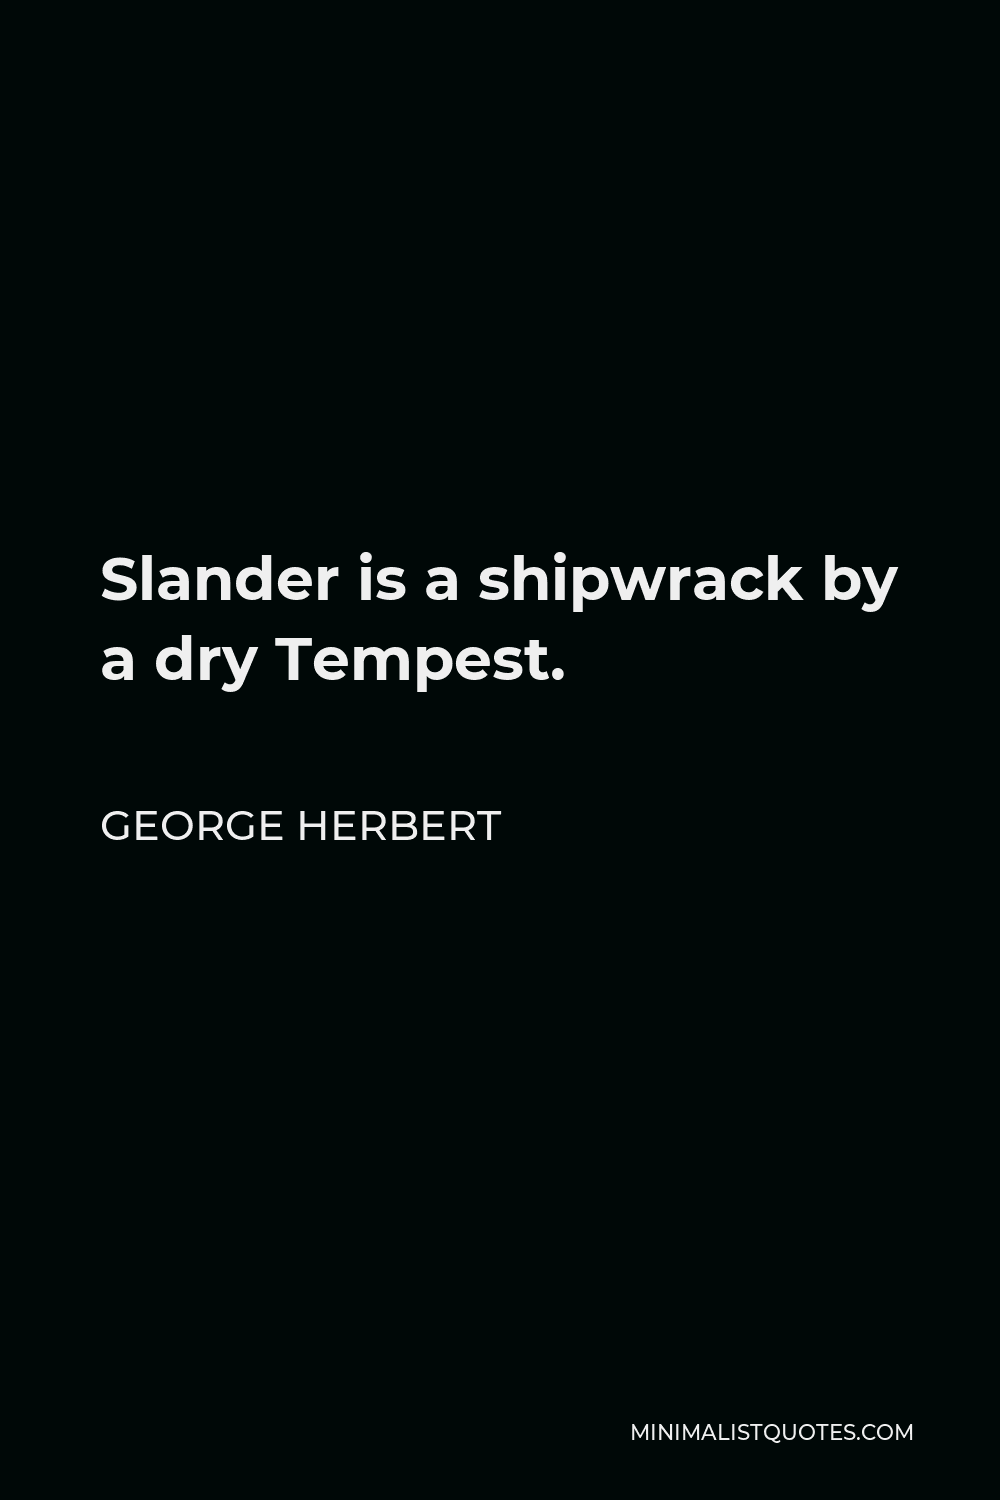 George Herbert Quote - Slander is a shipwrack by a dry Tempest.